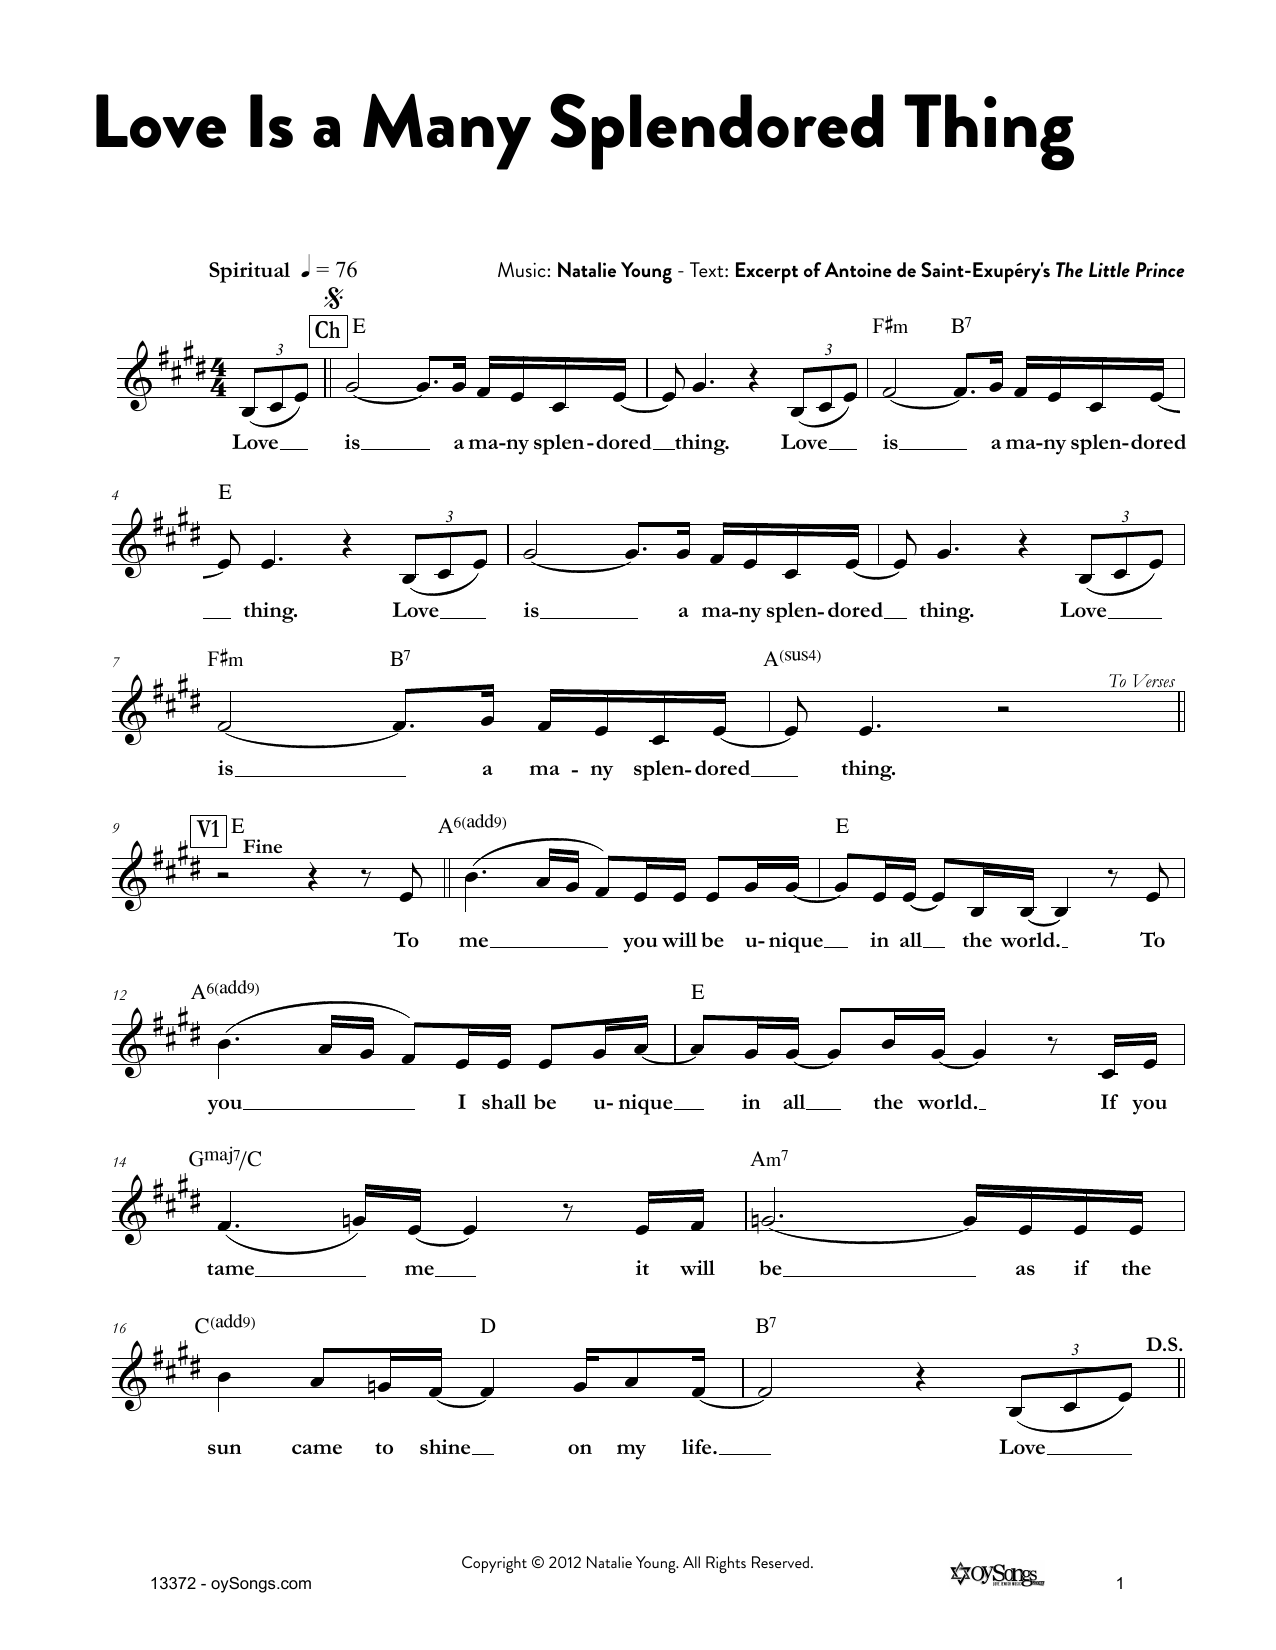 Download Natalie Young Love Is a Many Splendored Thing Sheet Music